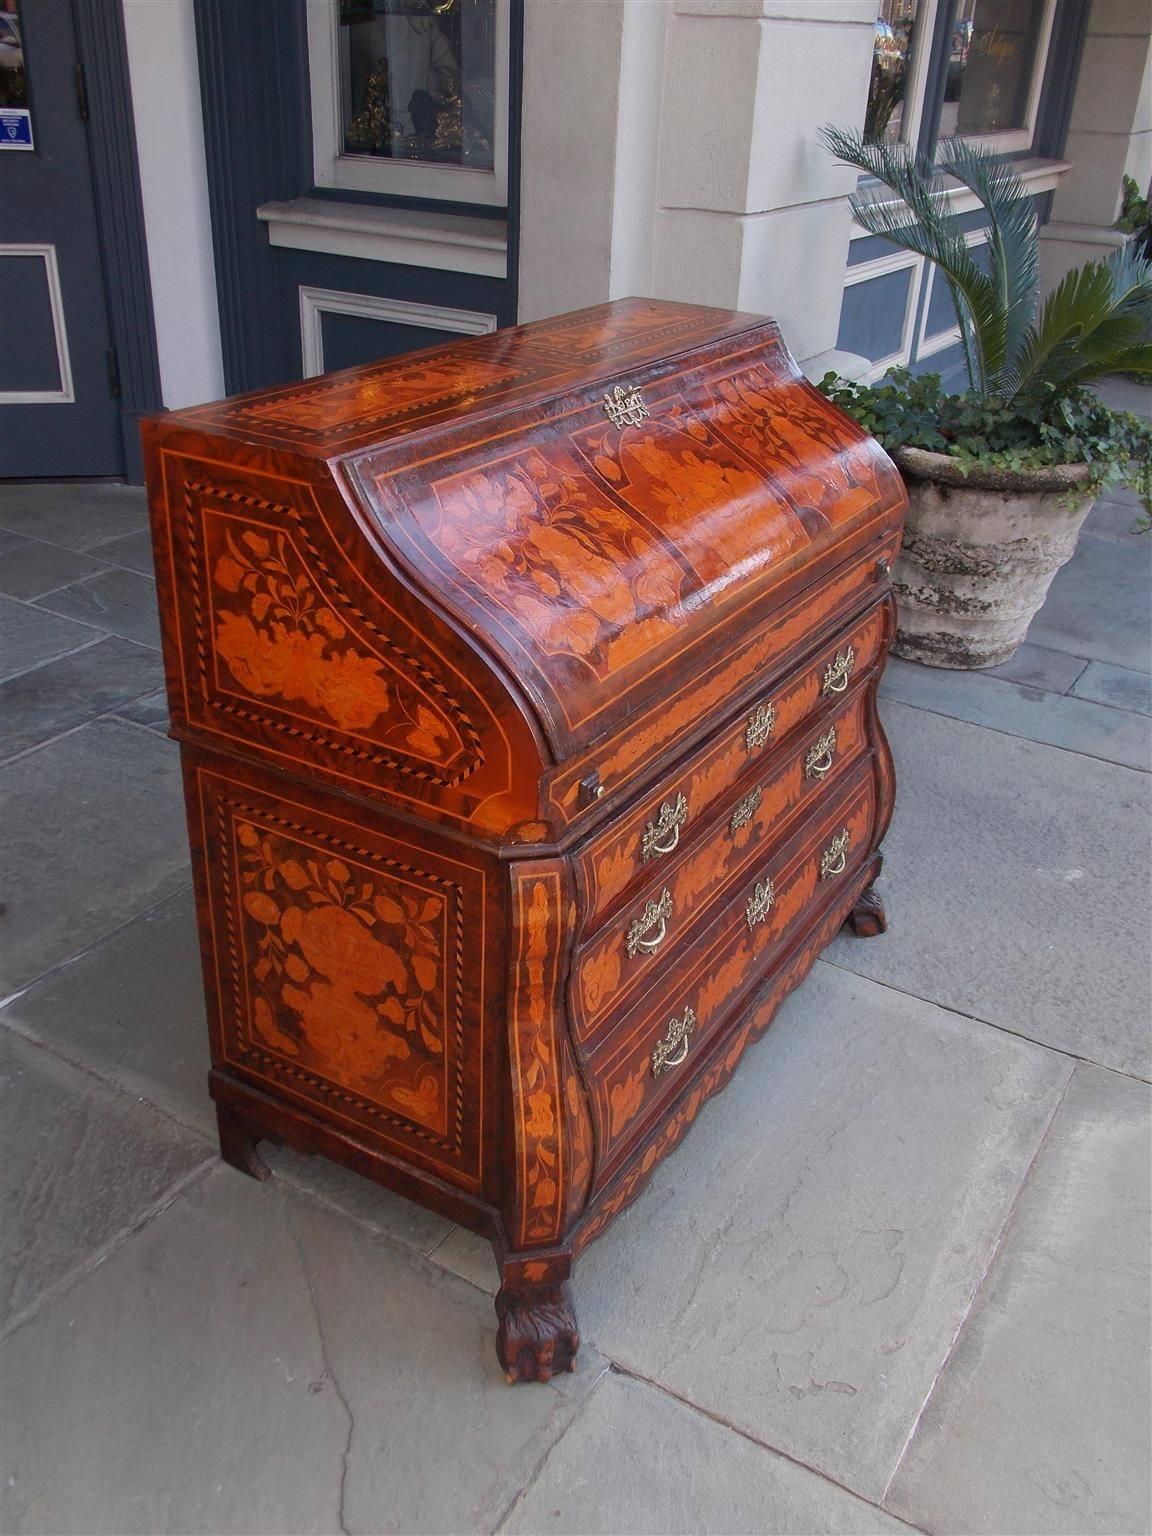 Dutch Marquetry burl walnut Bombay figural and foliage desk with exotic exterior inlays, fitted interior, three lower case drawers, original urn brasses, carved scalloped skirt, and terminating on the original lions paw feet, Mid-19th century.